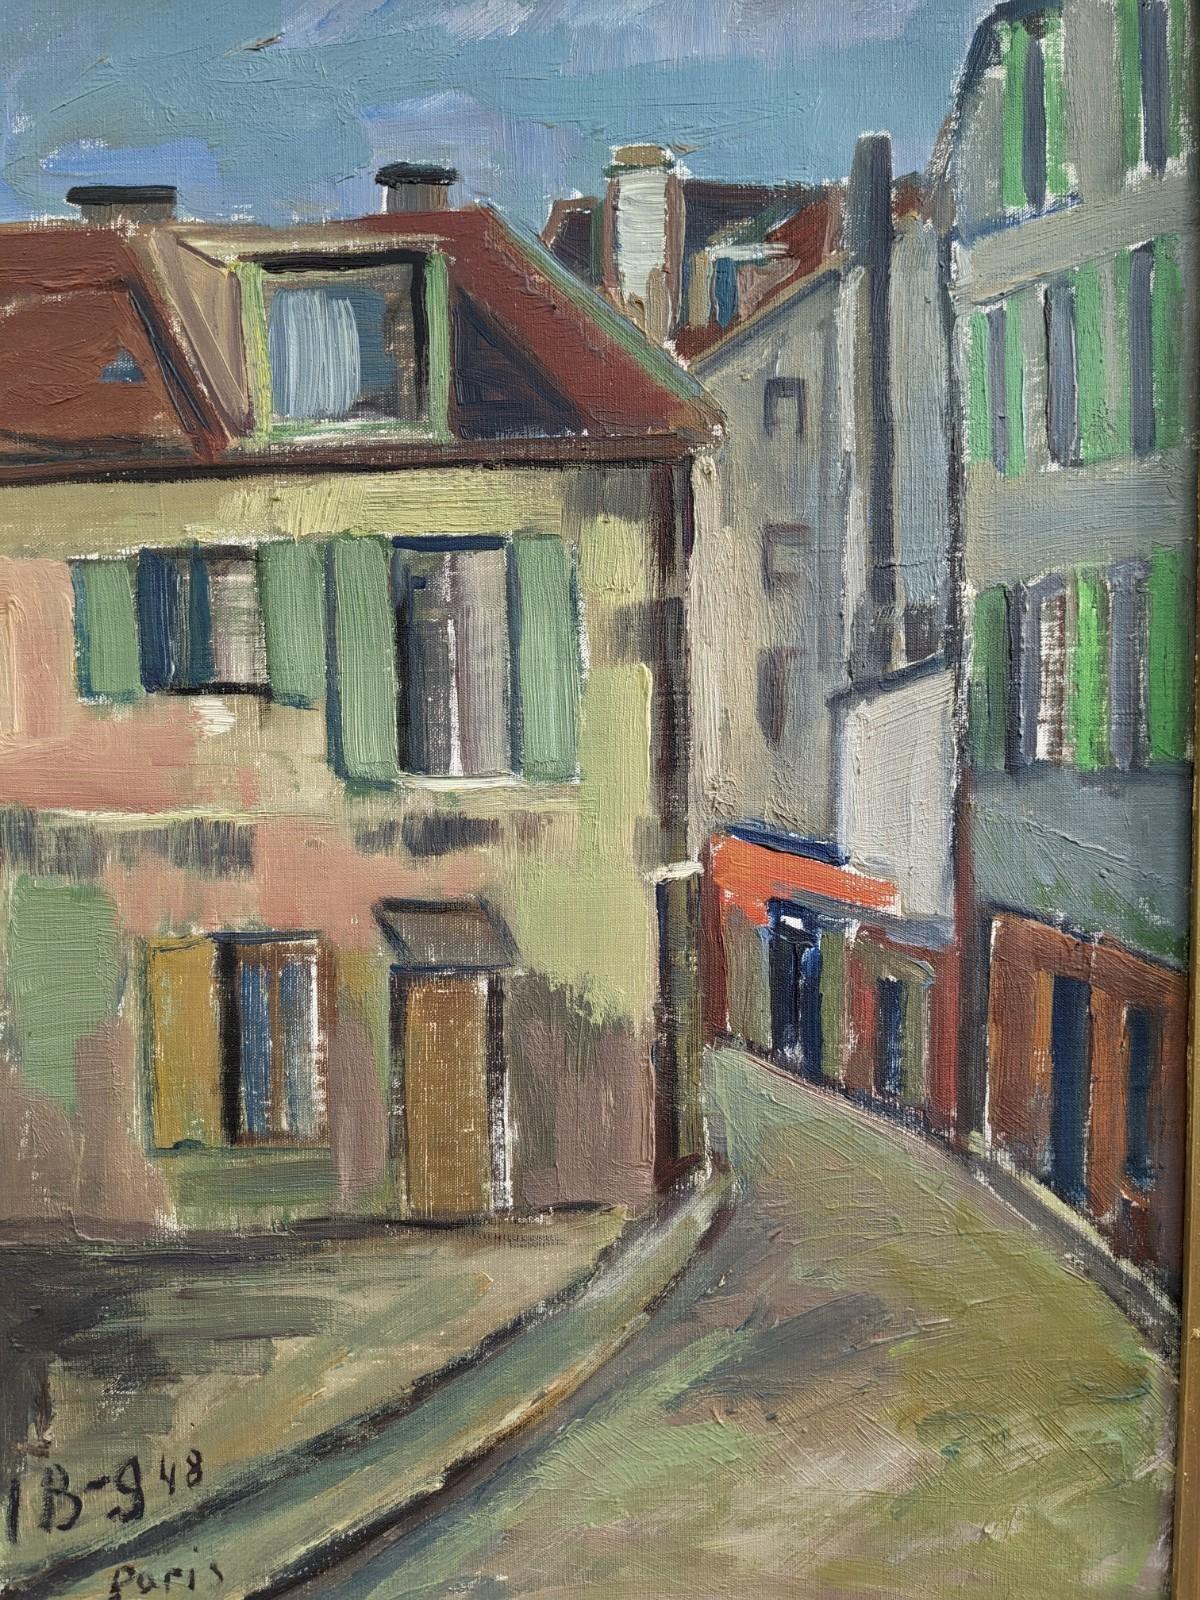 PARIS STREET WALK
Size: 60 x 48 cm (including frame)
Oil on Canvas

A charming mid century modernist style street scene composition, executed in oil onto canvas and dated 1948.

The painting depicts a colourful street scene in Paris, where rows of